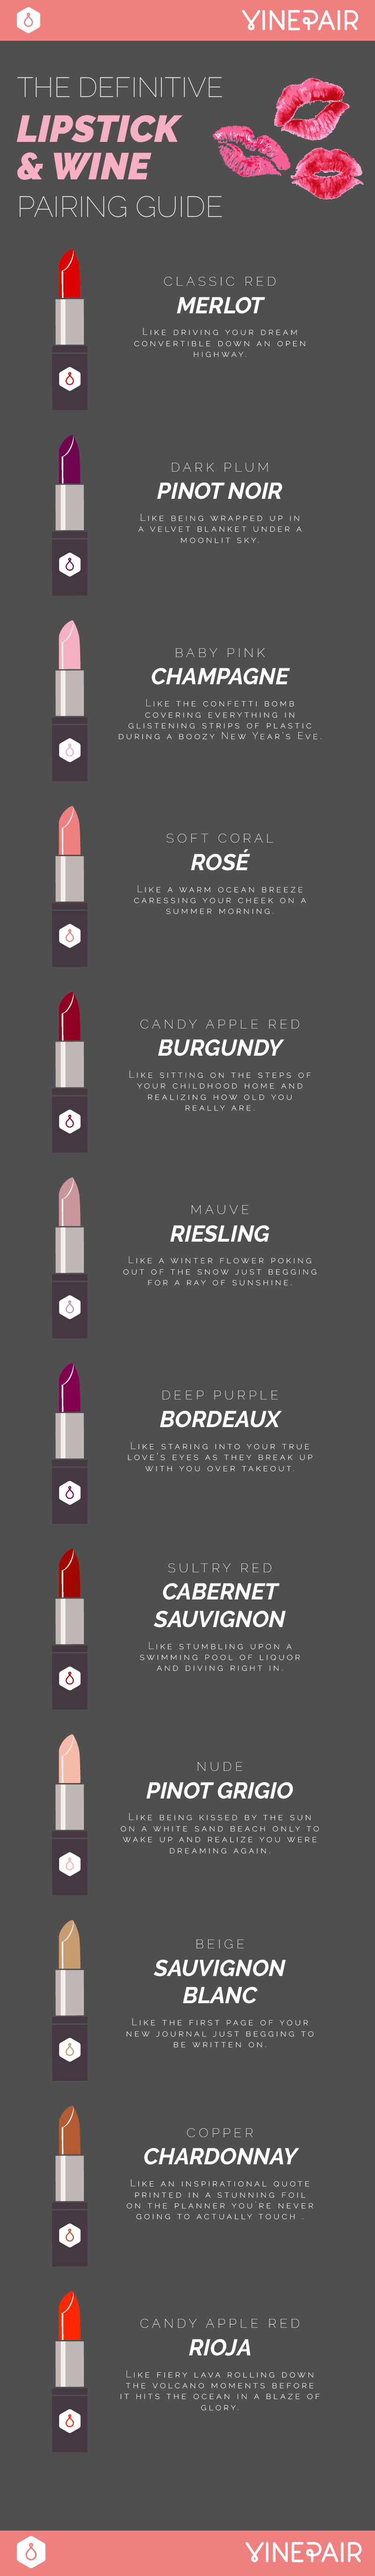 Your Definitive Guide to Pairing Lipstick With Wine [INFOGRAPHIC]